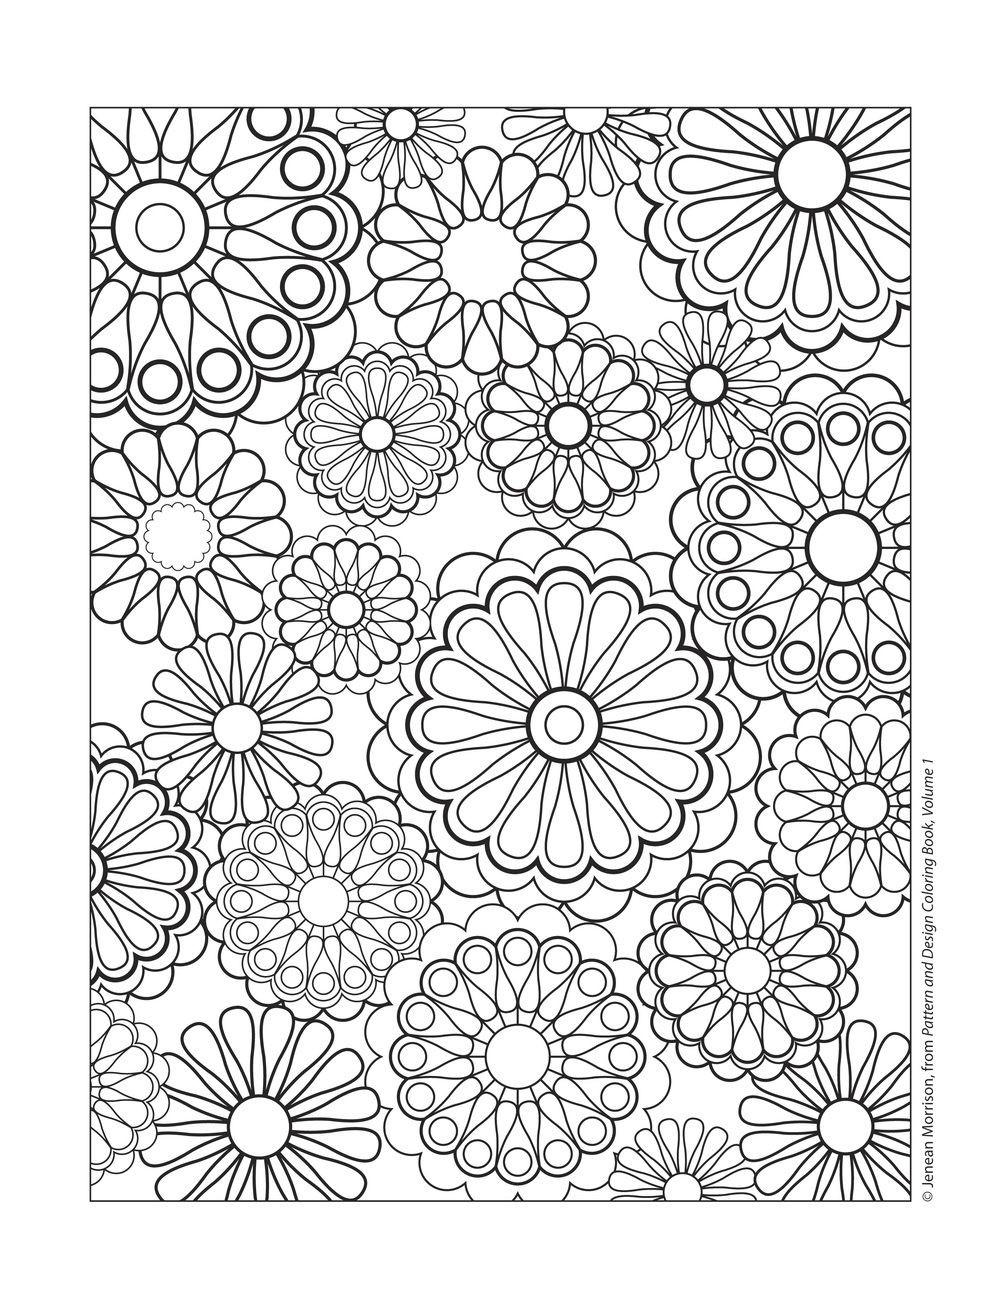 30 Stunning White Flowers In Clear Vase 2024 free download white flowers in clear vase of cool vases flower vase coloring page pages flowers in a top i 0d in free colouring pages for children best design patterns coloring pages free coloring pages f